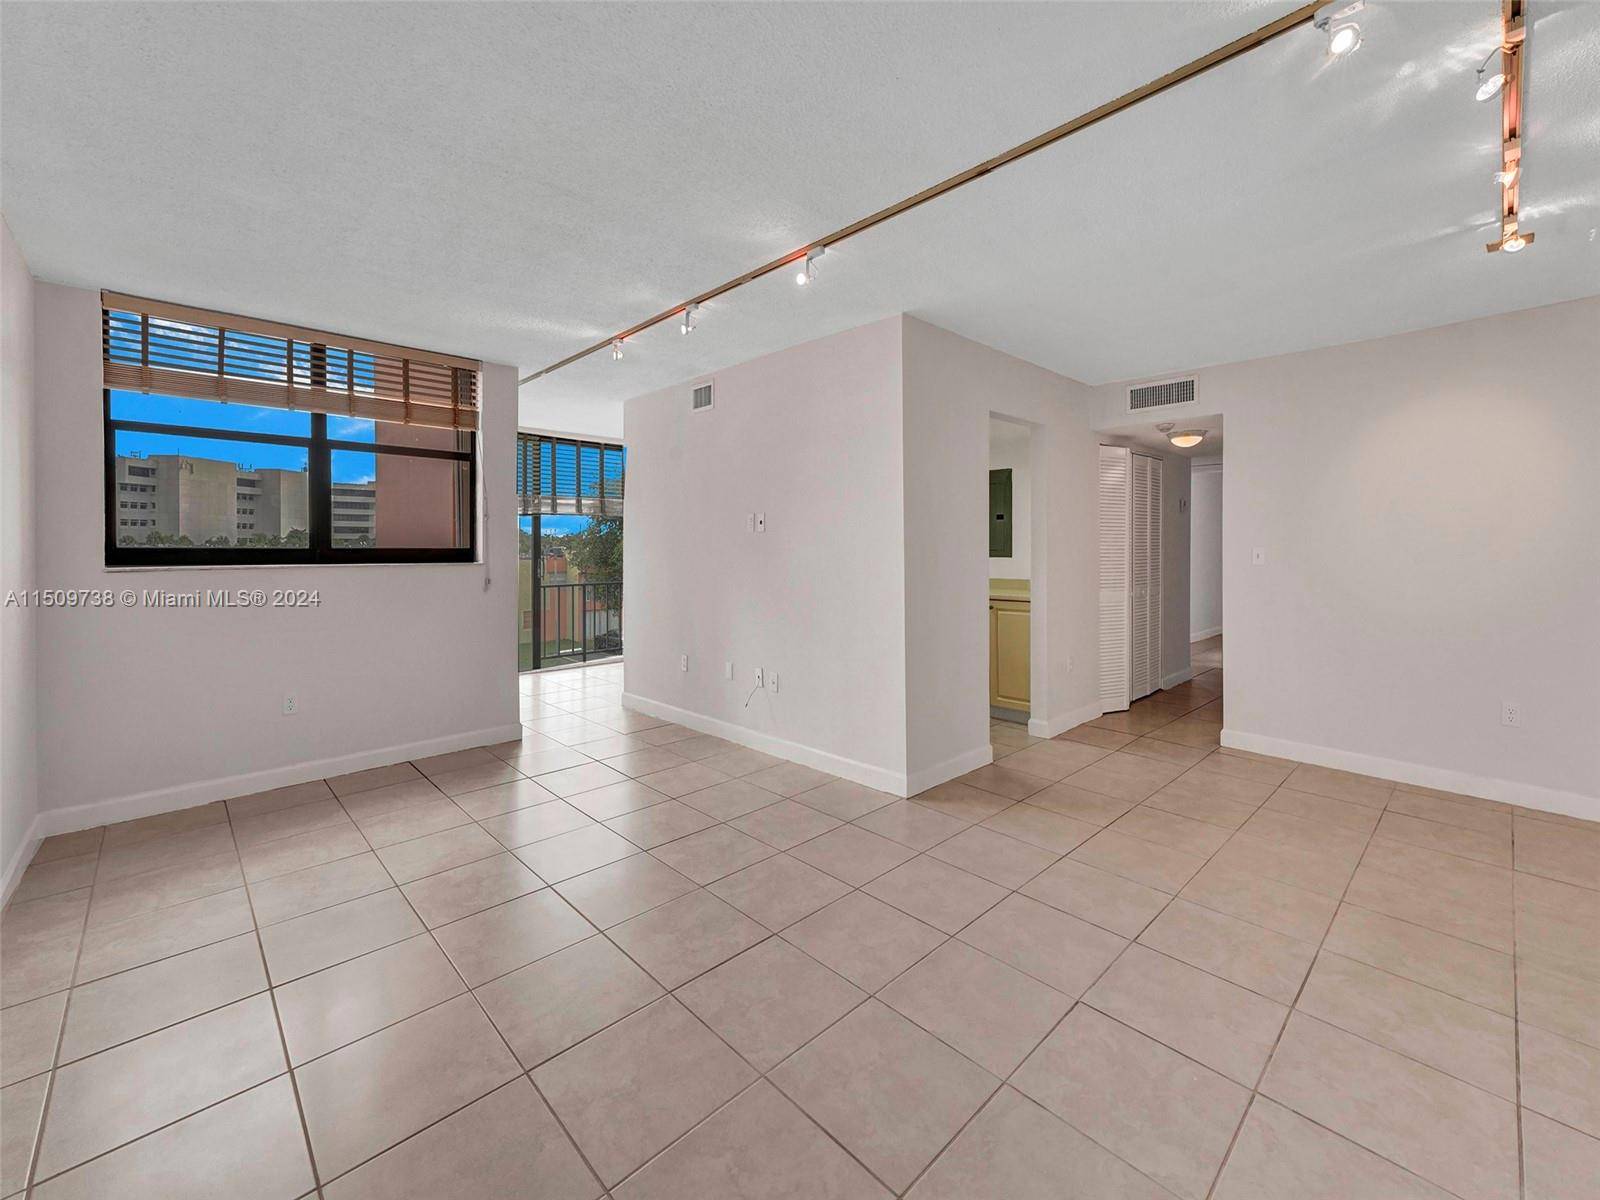 Stunning and sunny 2 bedroom, 2 bathroom condo in the heart of Miami !